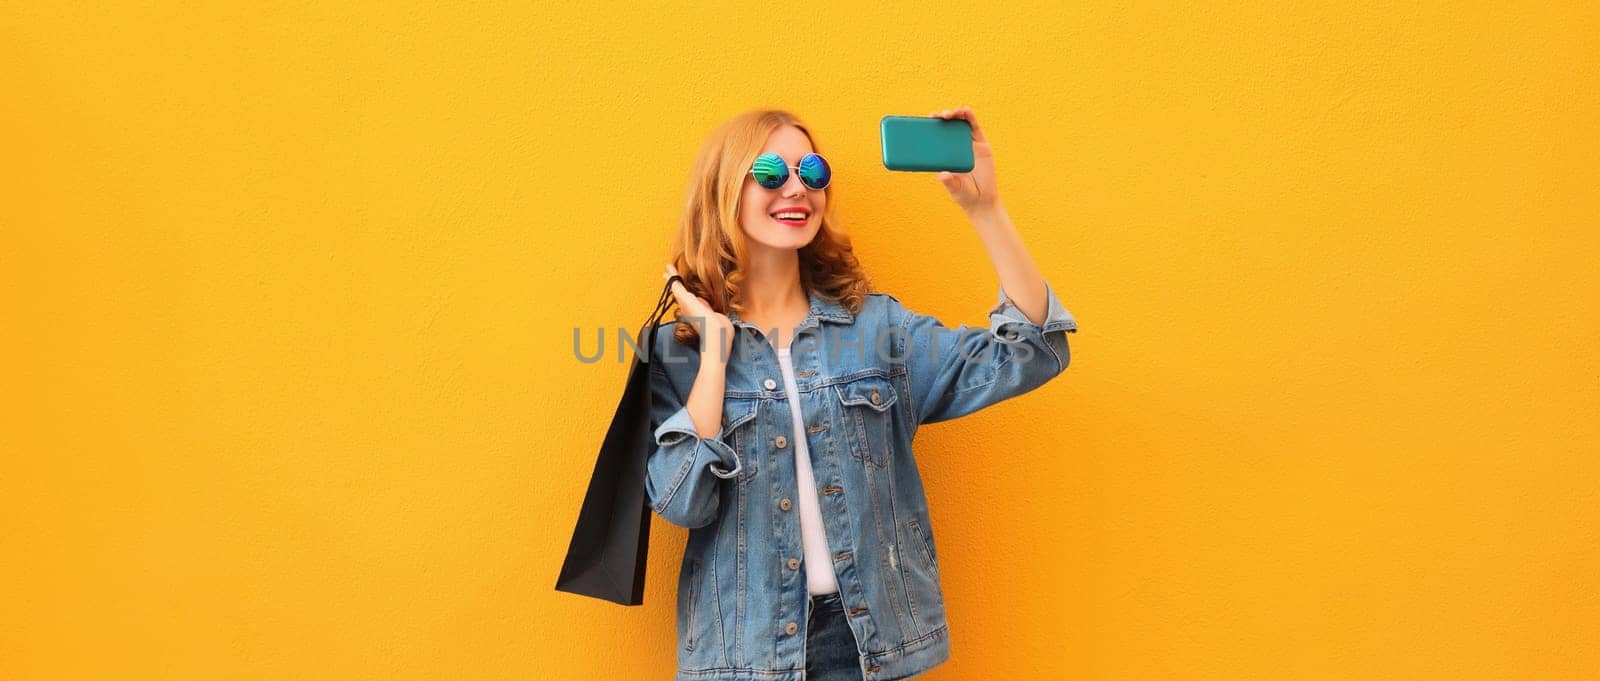 Happy smiling young woman taking selfie with phone holding shopping bags on yellow background by Rohappy